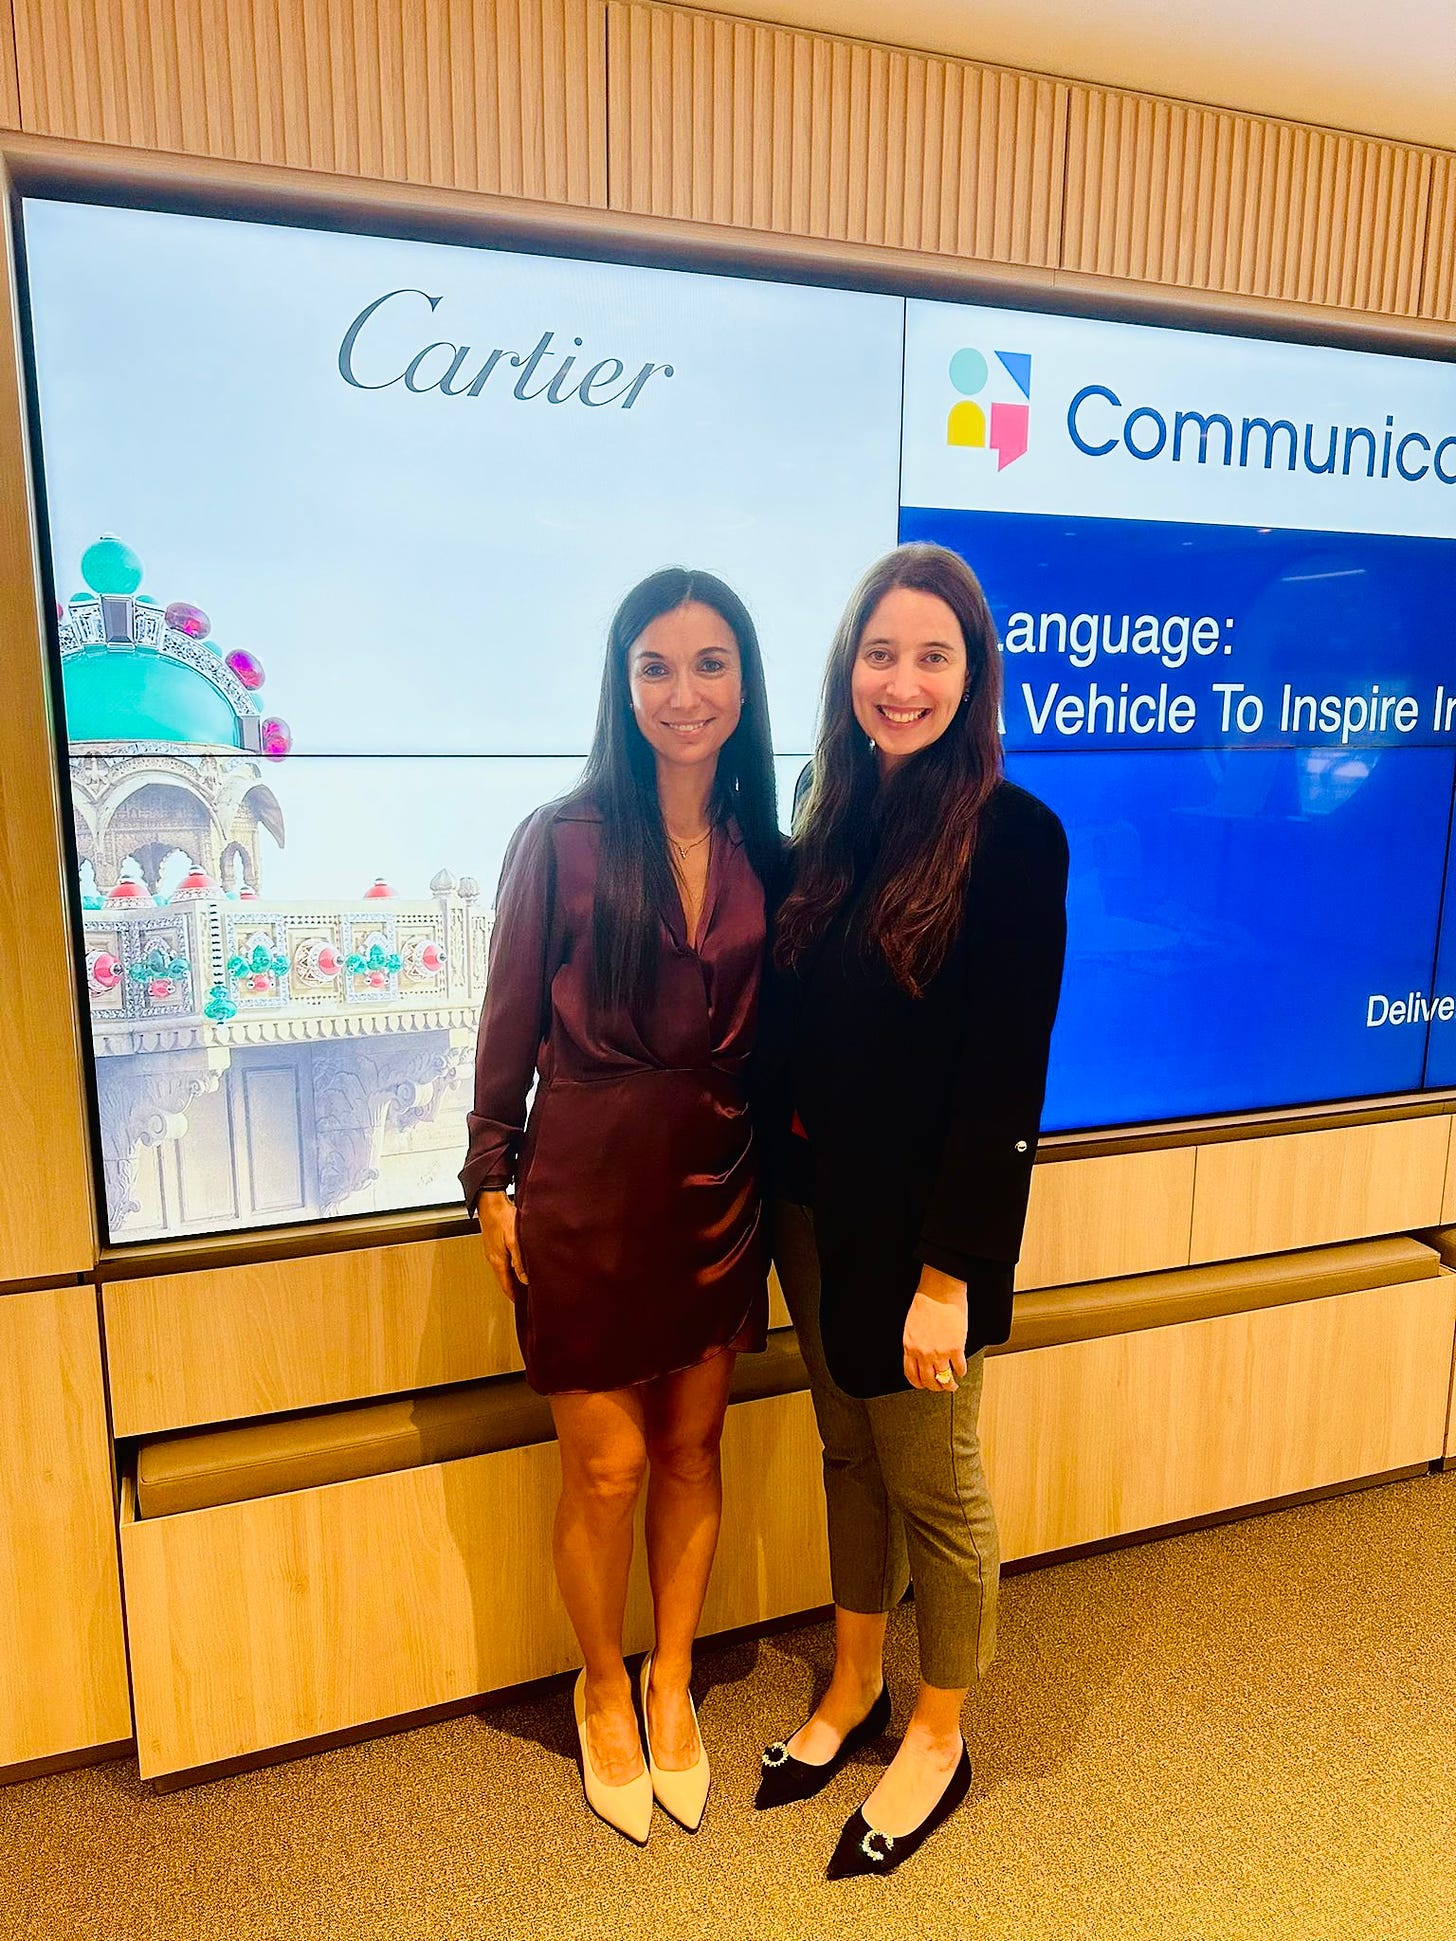 Picture of 2 women standing in front of a power point screen with a sign that reads CARTIER